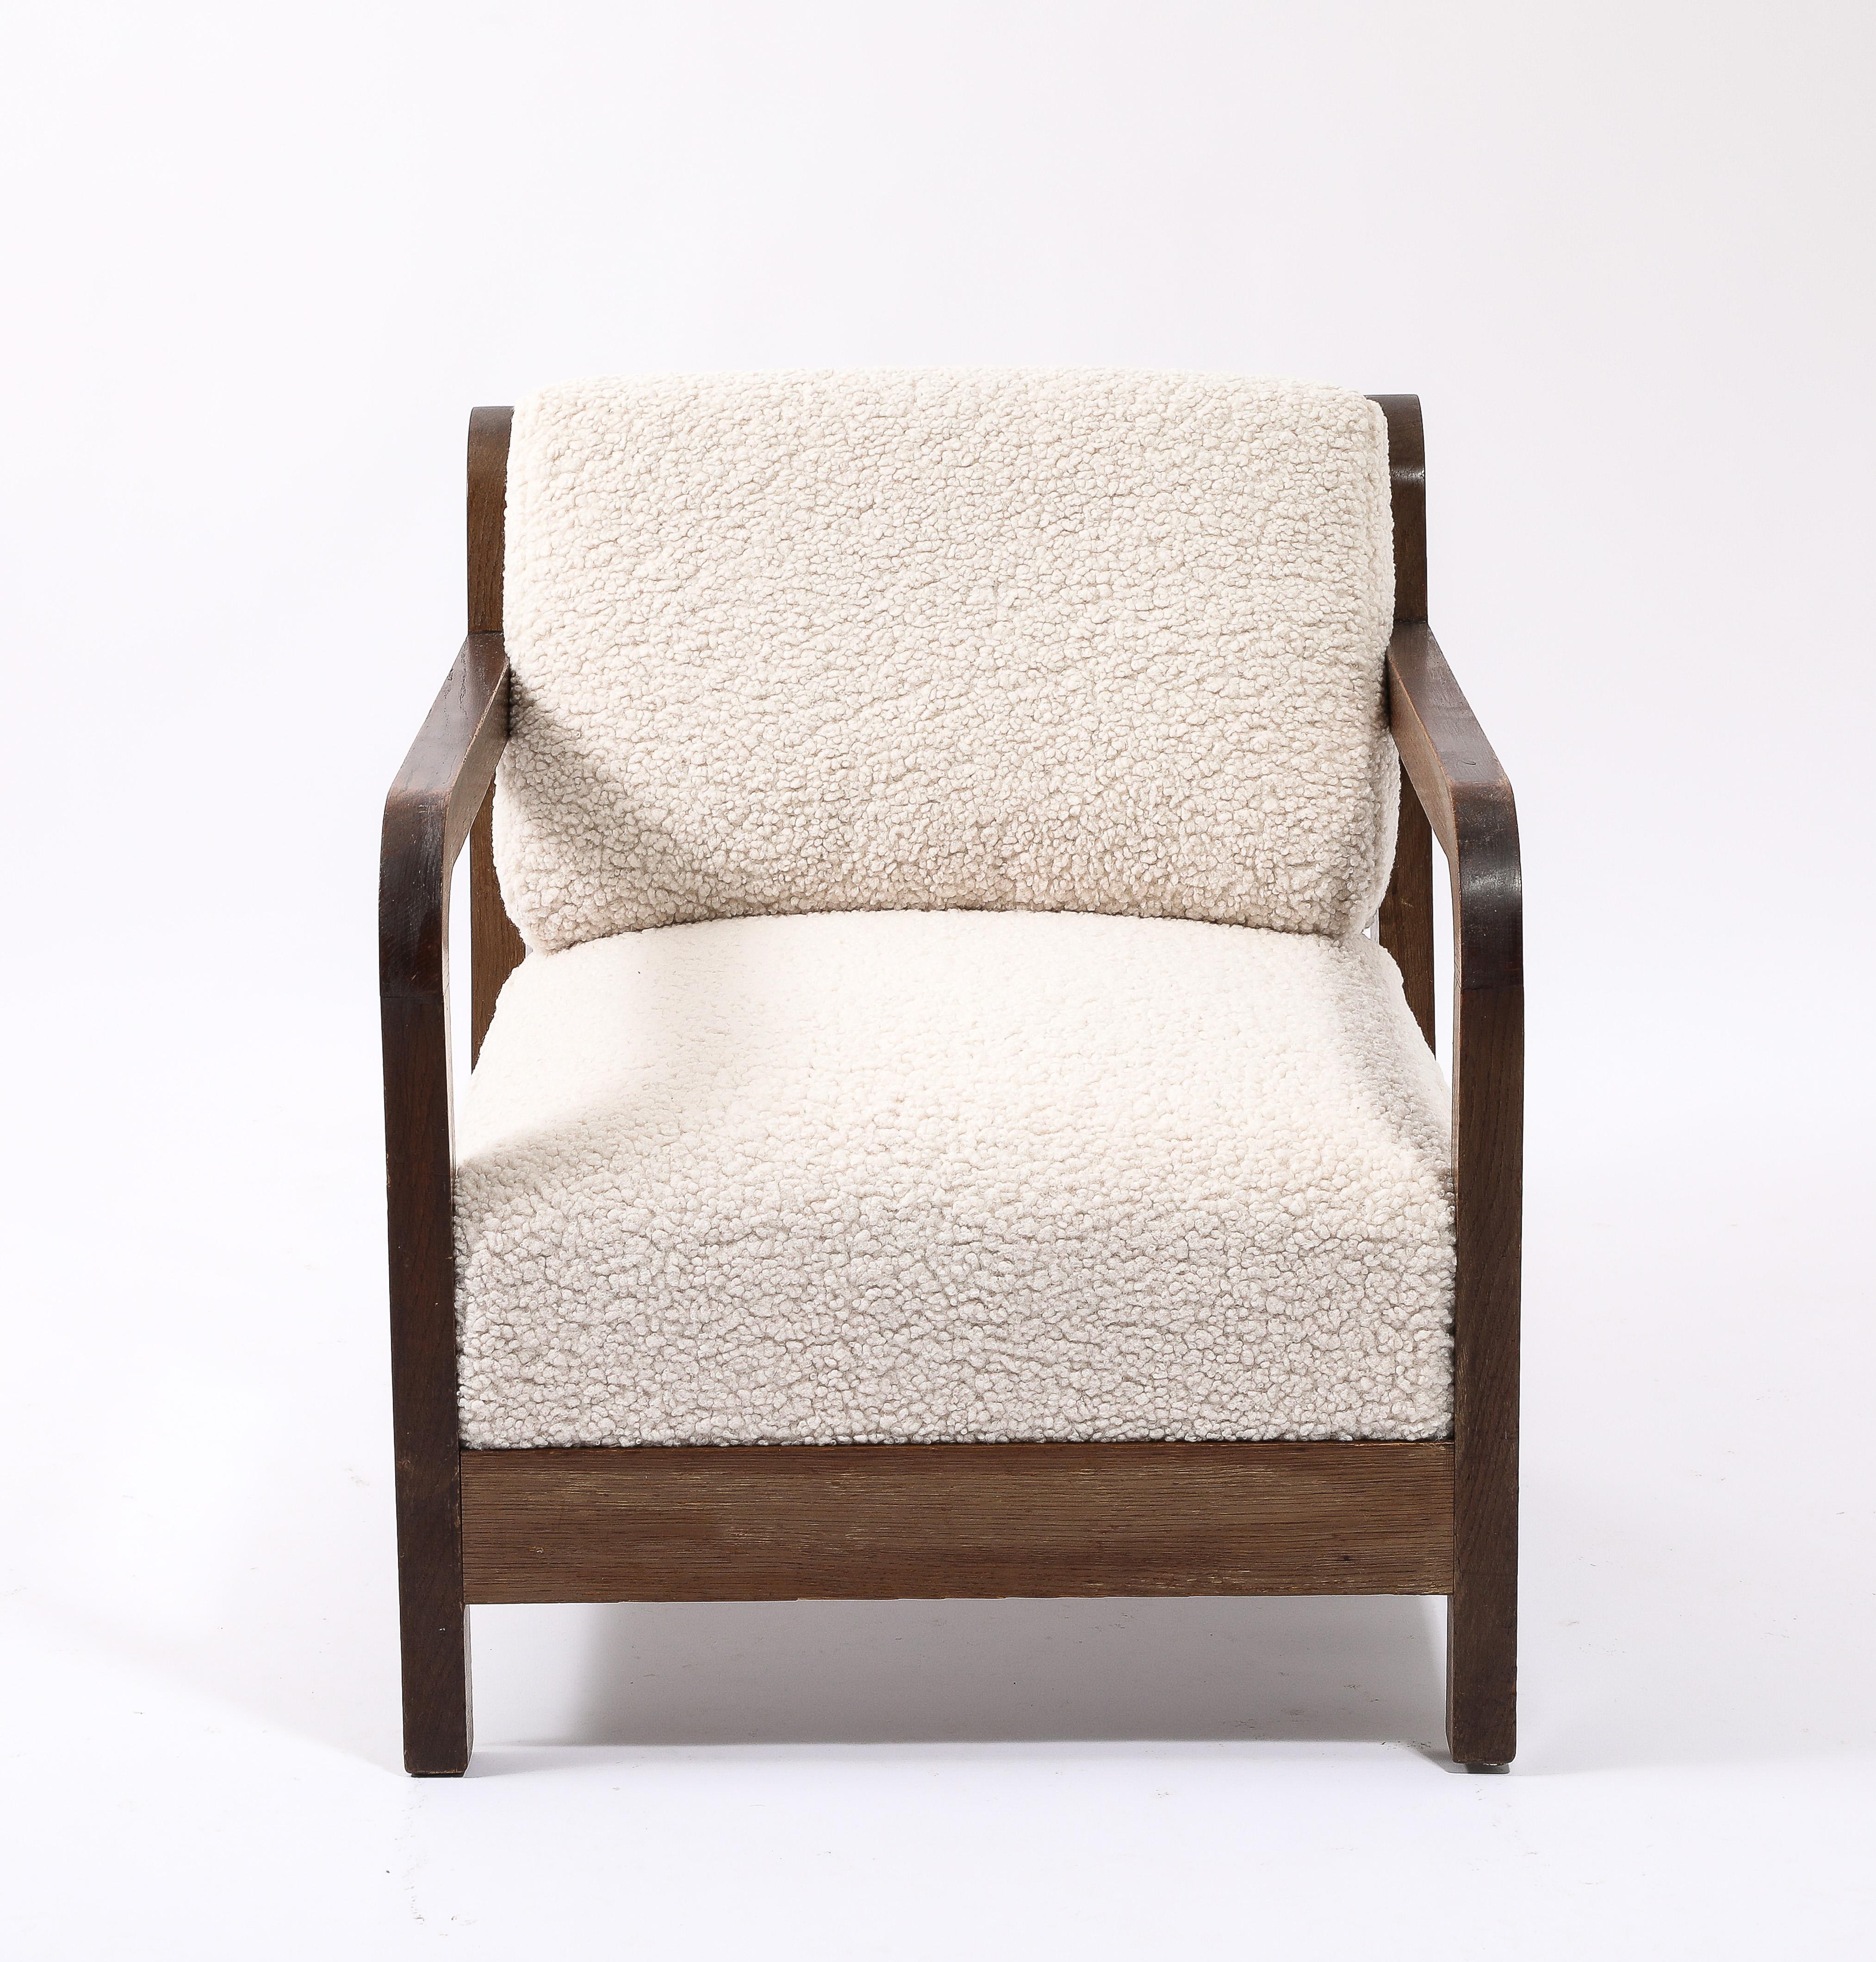 Large Oak Armchairs in the manner of Gabriel with a ladder back construction. Reupholstered in faux shearling.

